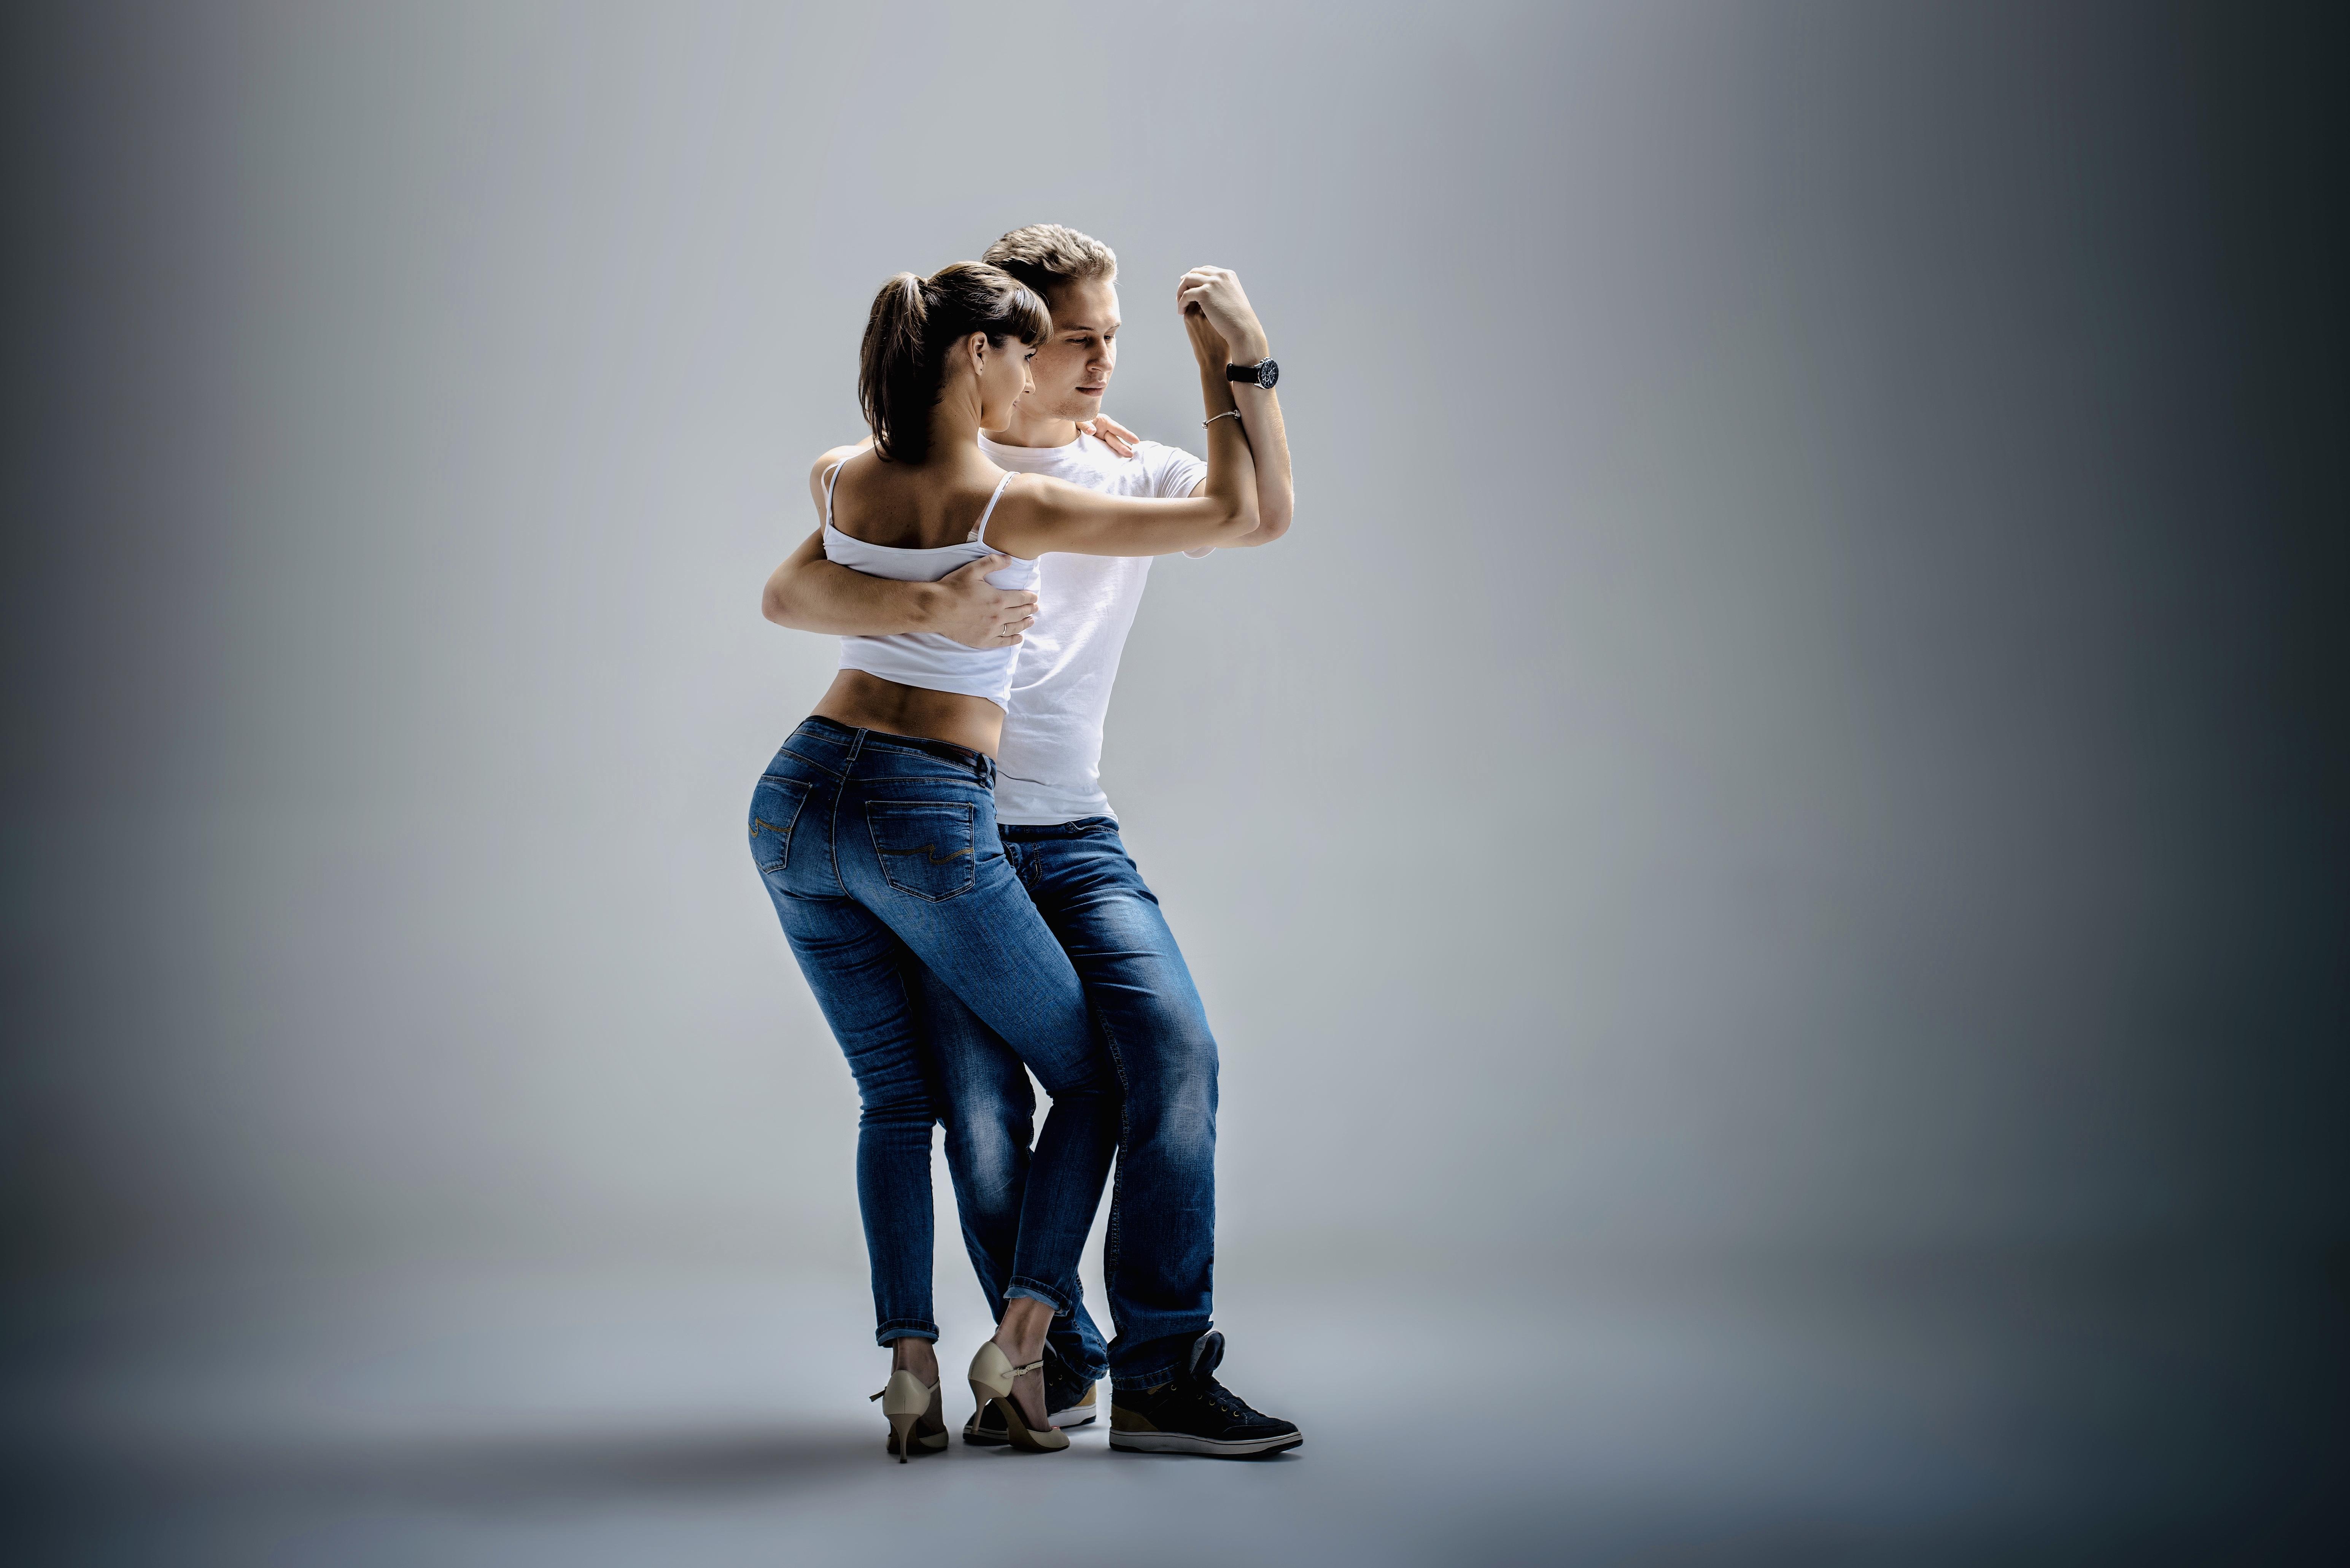 Bachata or Salsa Dancing - 1 Hr Private Lesson - Introductory Special